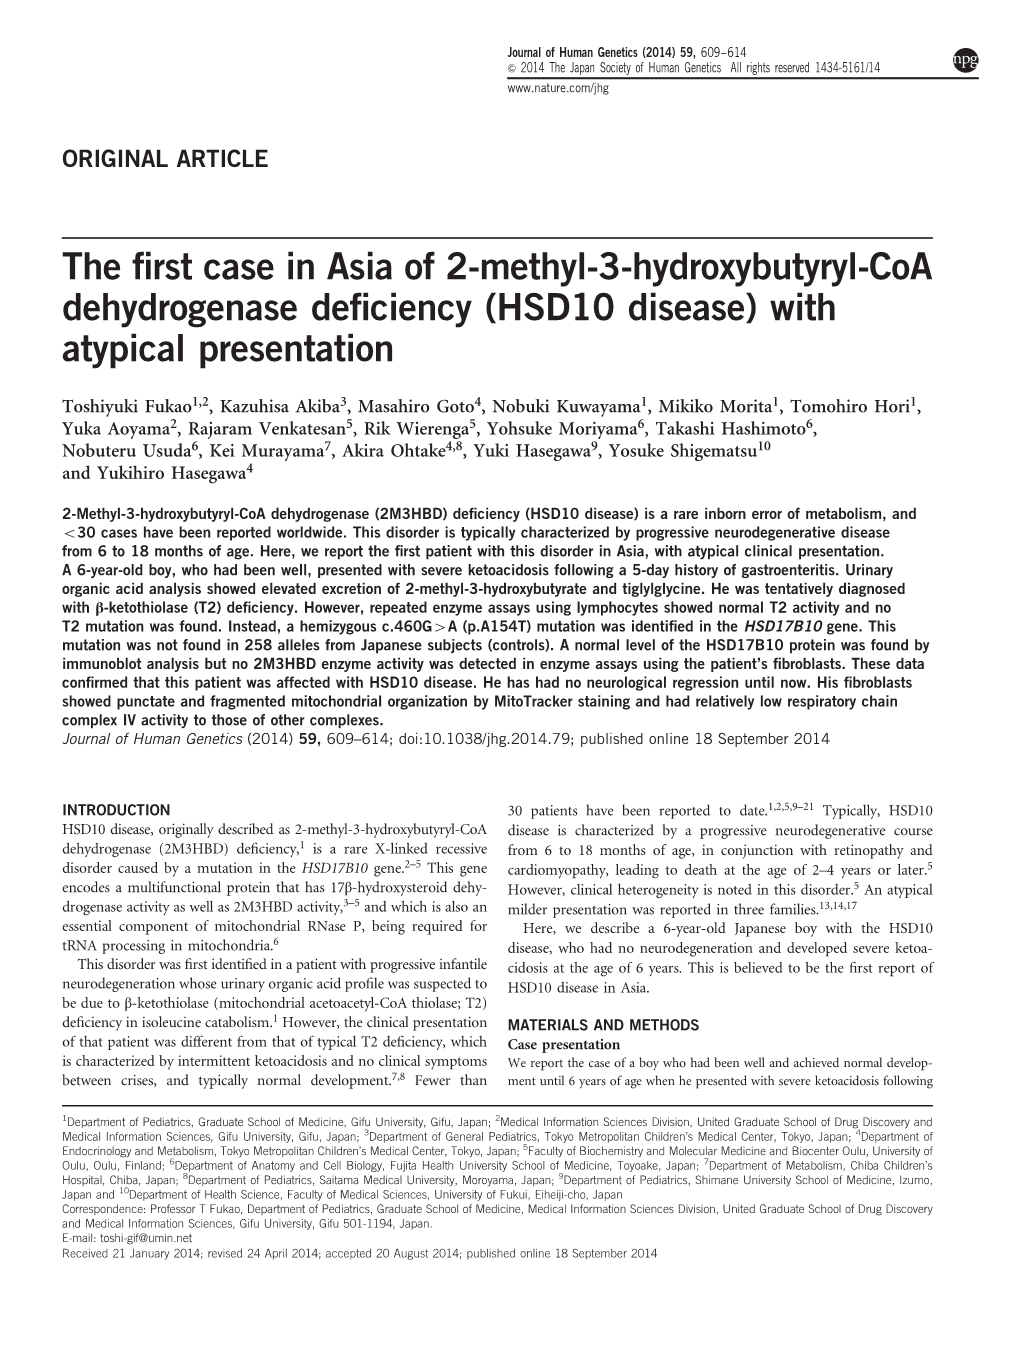 The First Case in Asia of 2-Methyl-3-Hydroxybutyryl-Coa